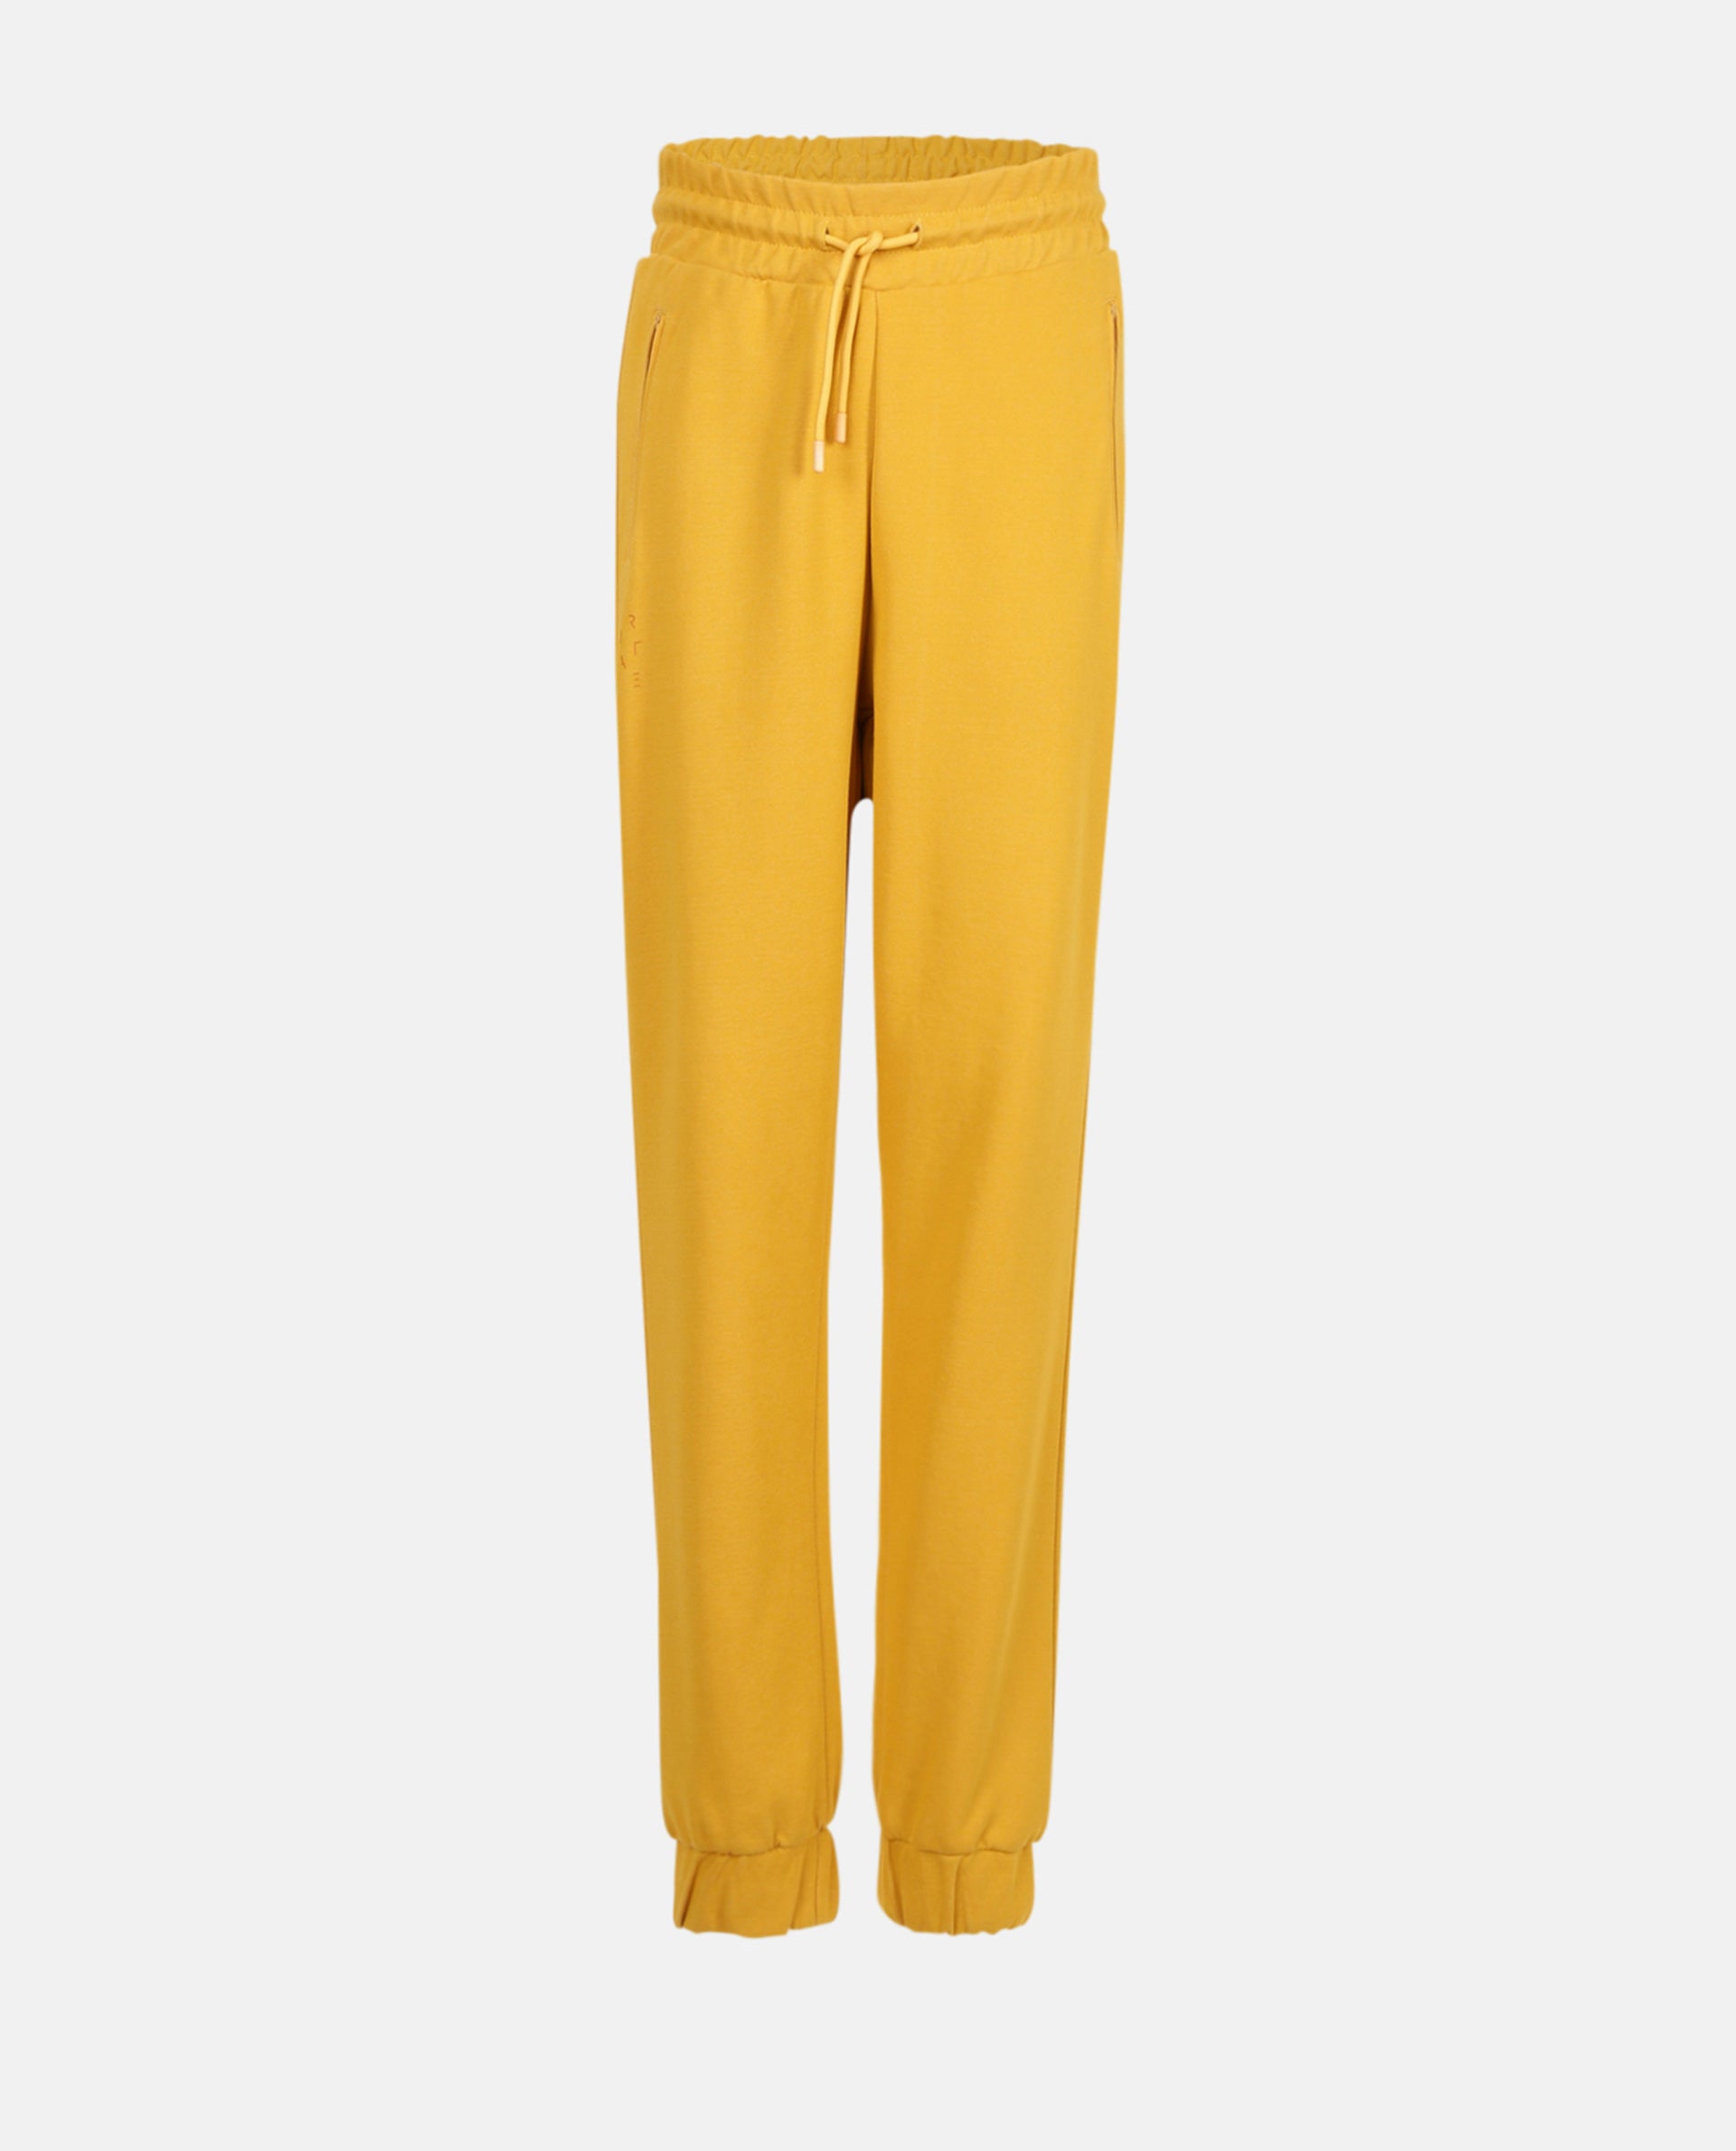 Spring Outfits With Yellow Pants For Women | Yellow pants outfit, Neon yellow  pants, Yellow pants